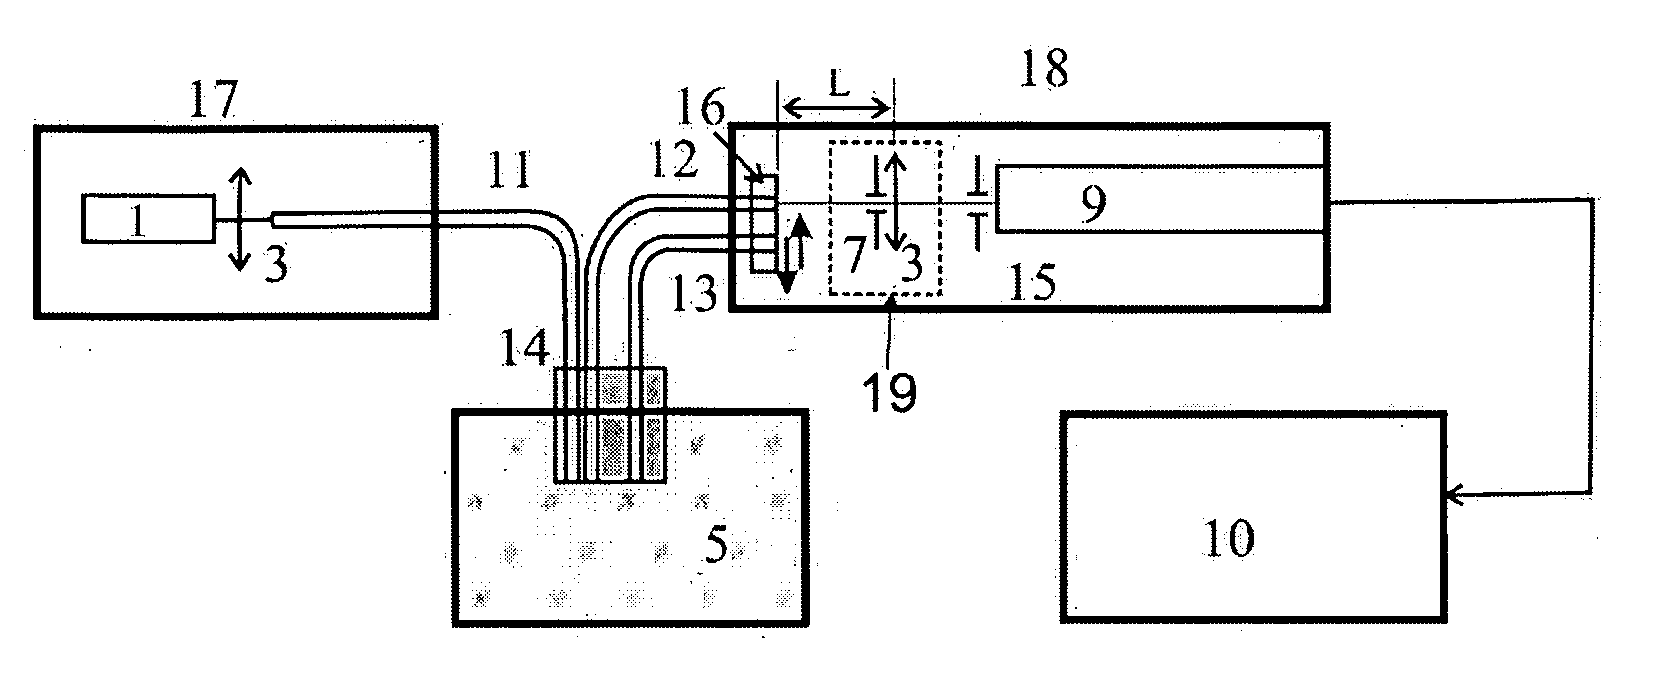 Method and apparatus for measuring particle sizes in a liquid field of the invention